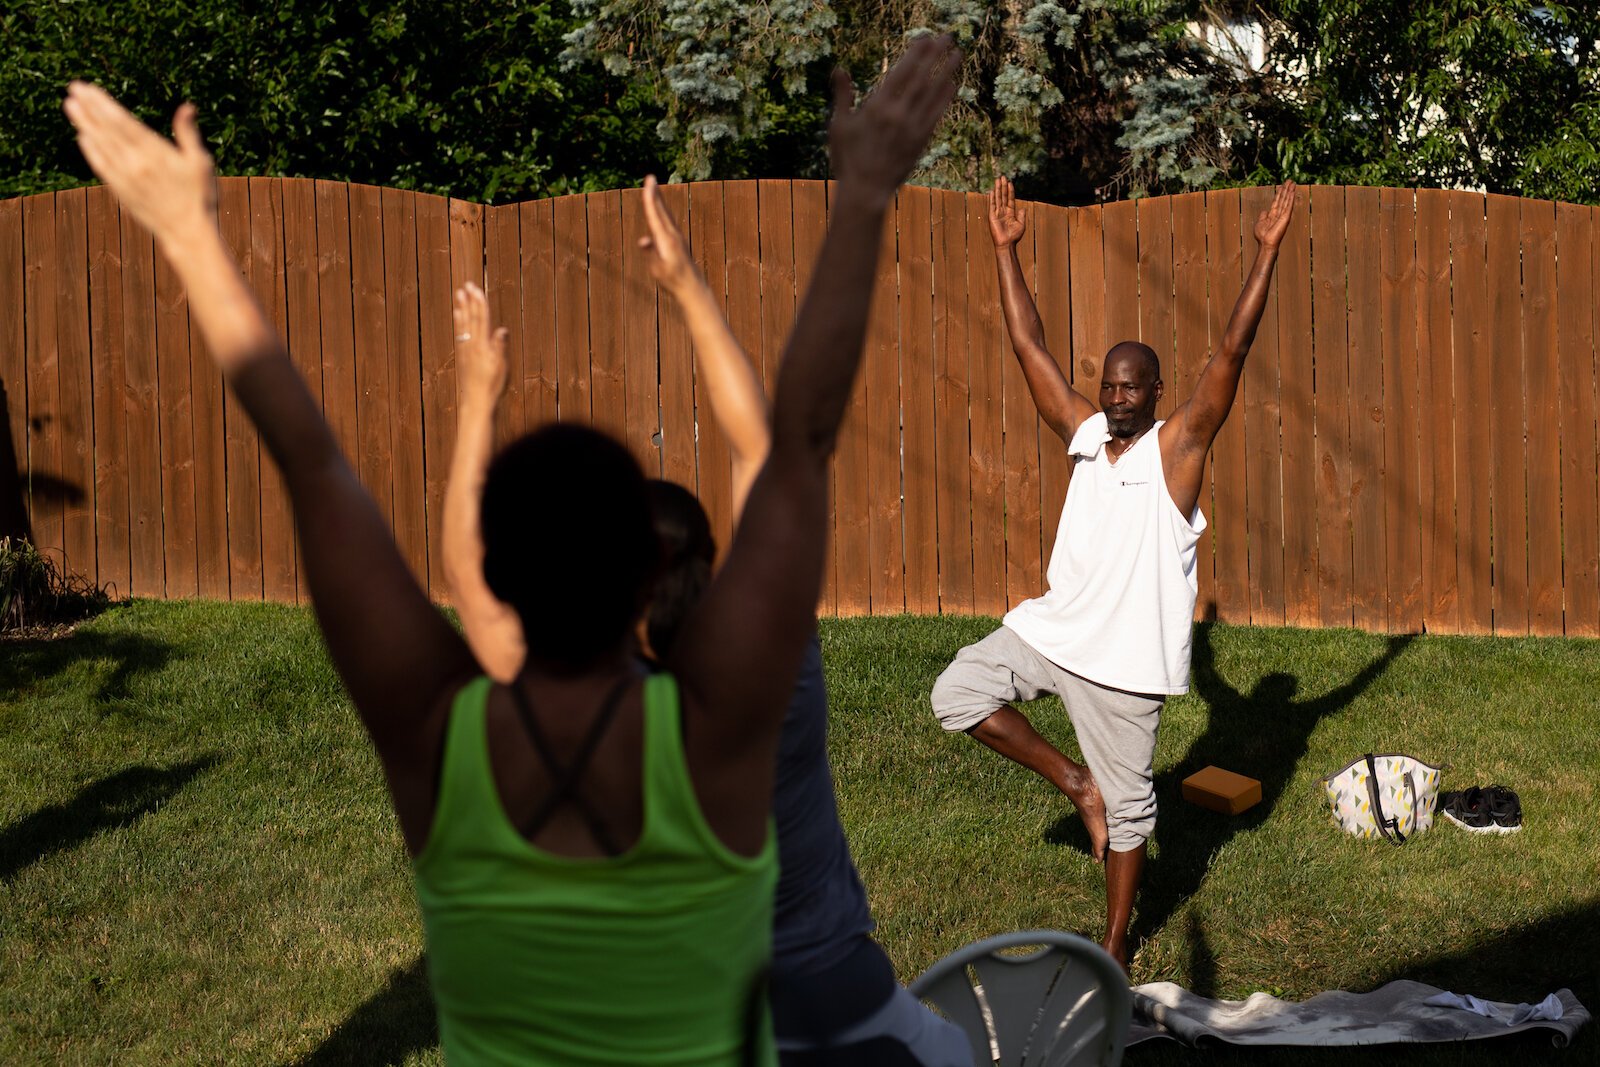 About eight men and women participate in a recent yoga class in Diane Rogers's backyard in South East Fort Wayne.